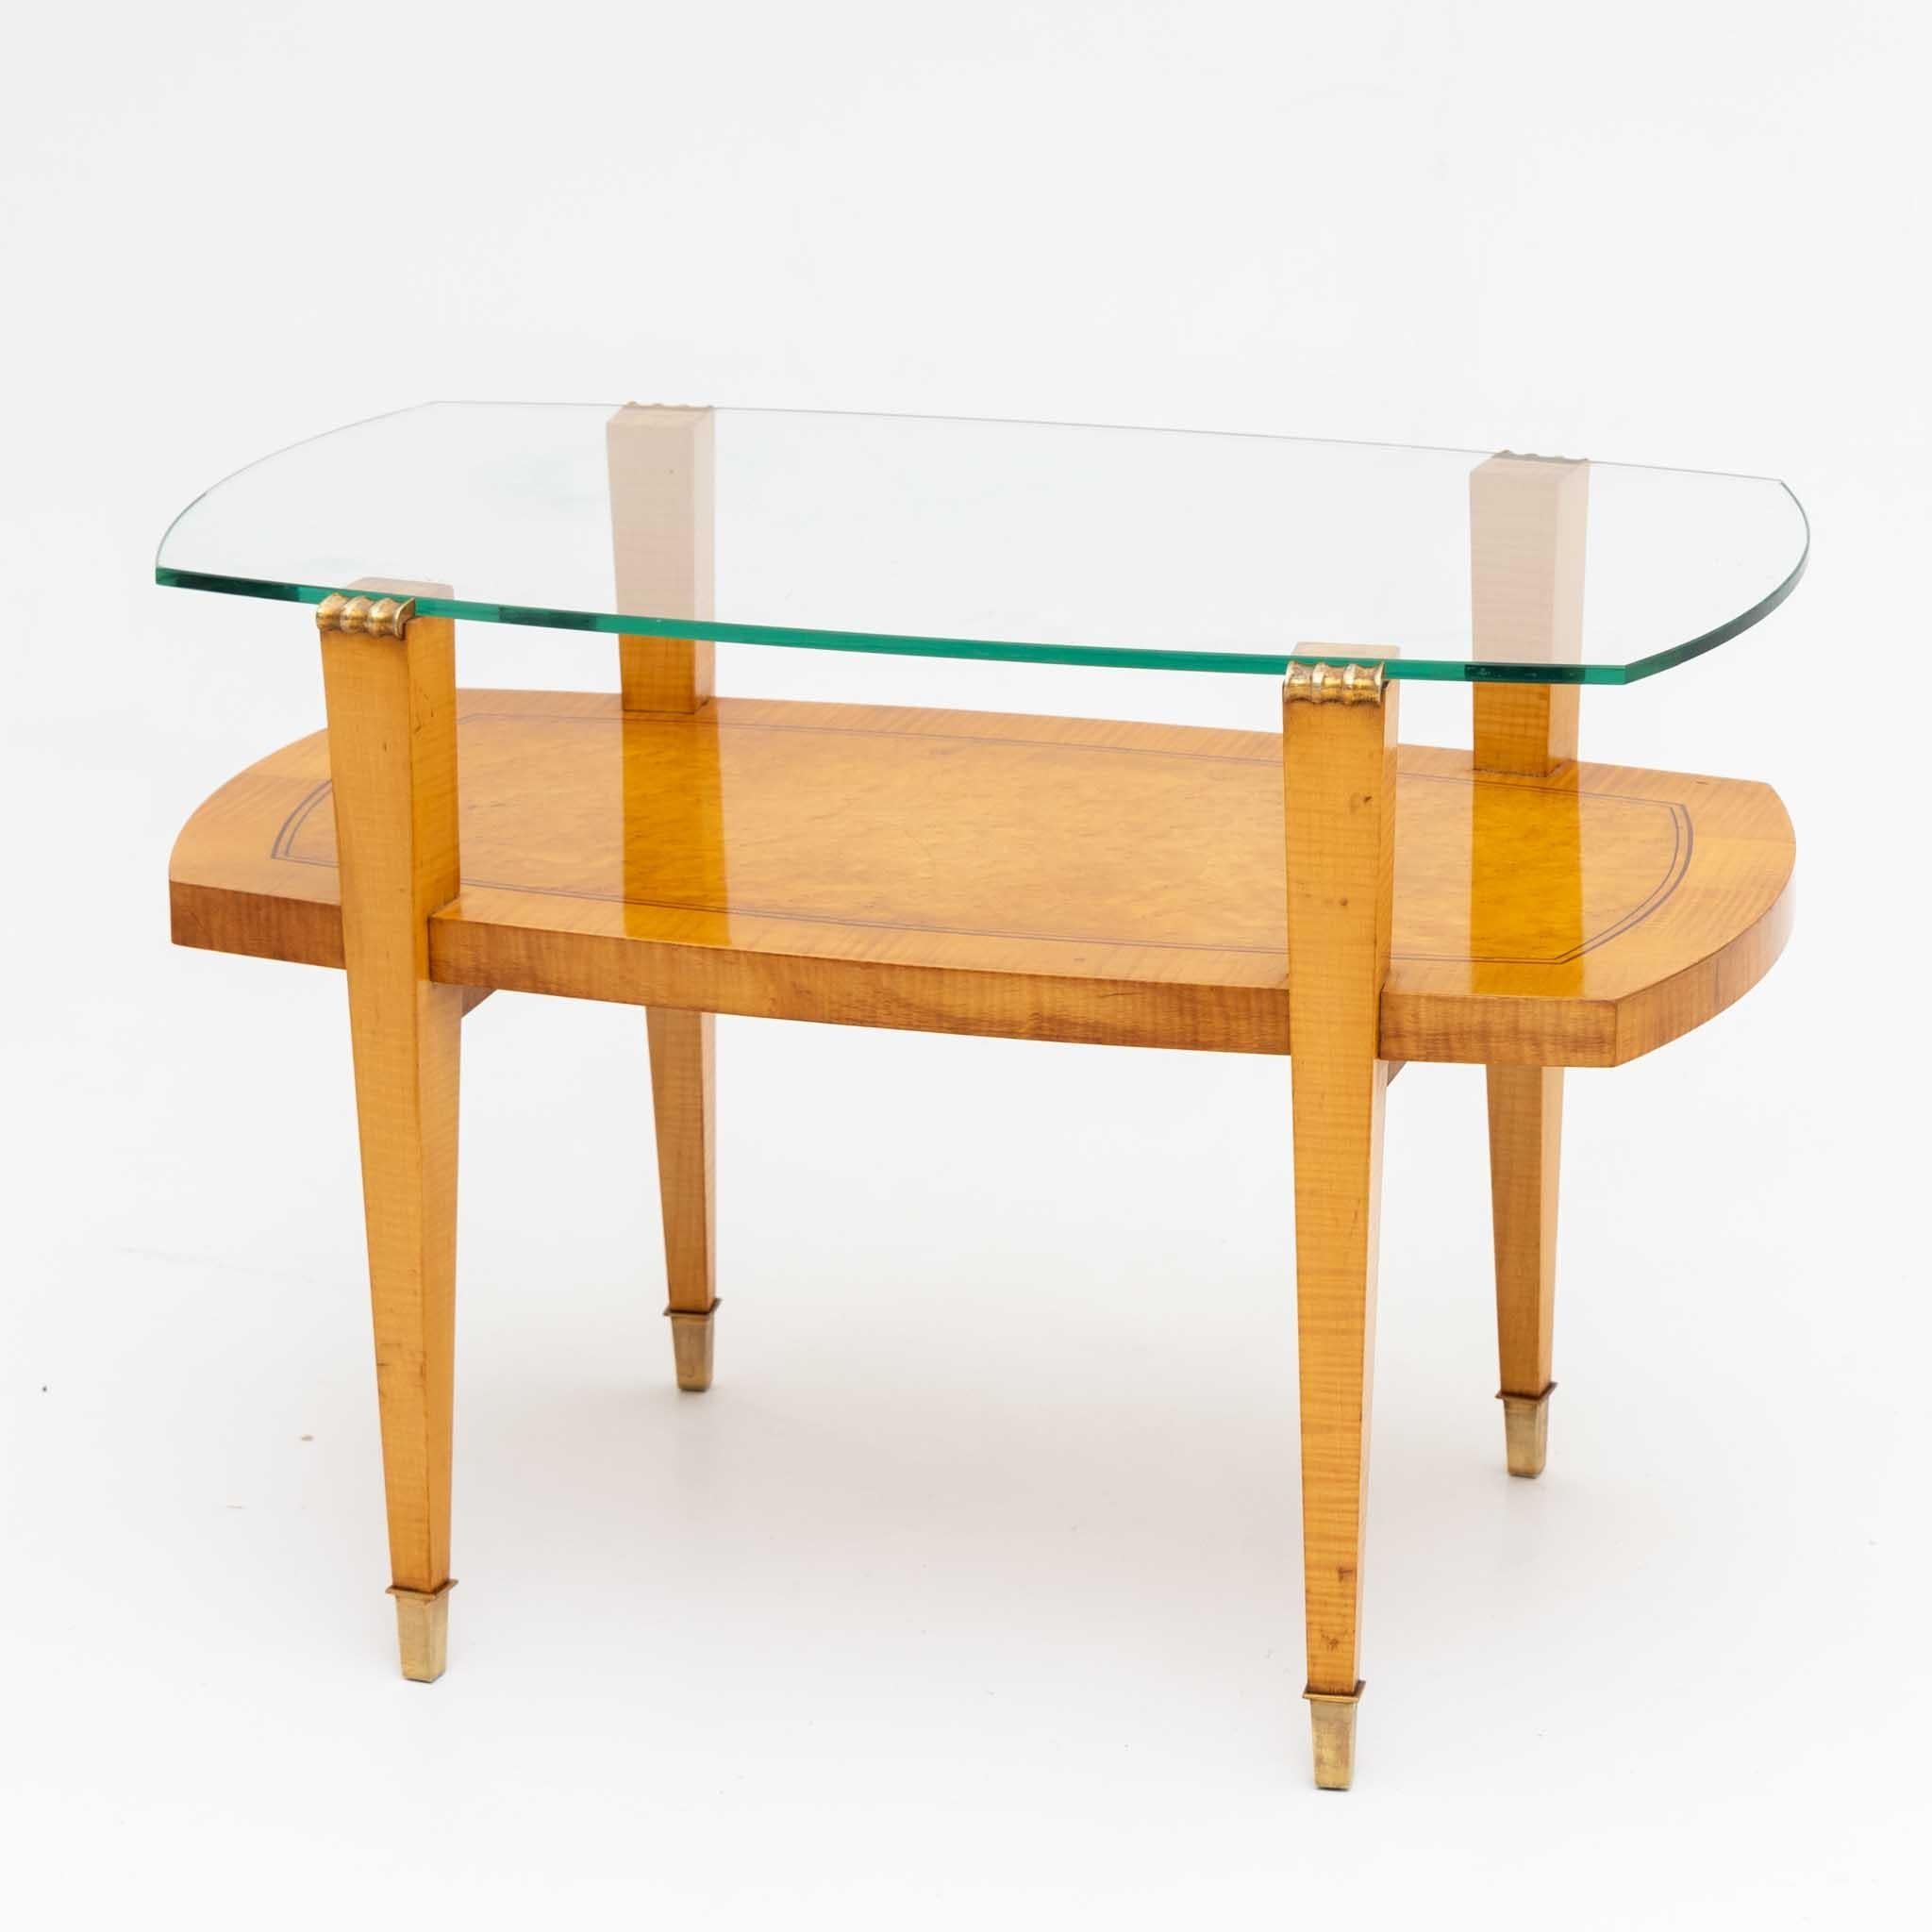 European Art Deco Coffee Table with Glass Top, 1940s